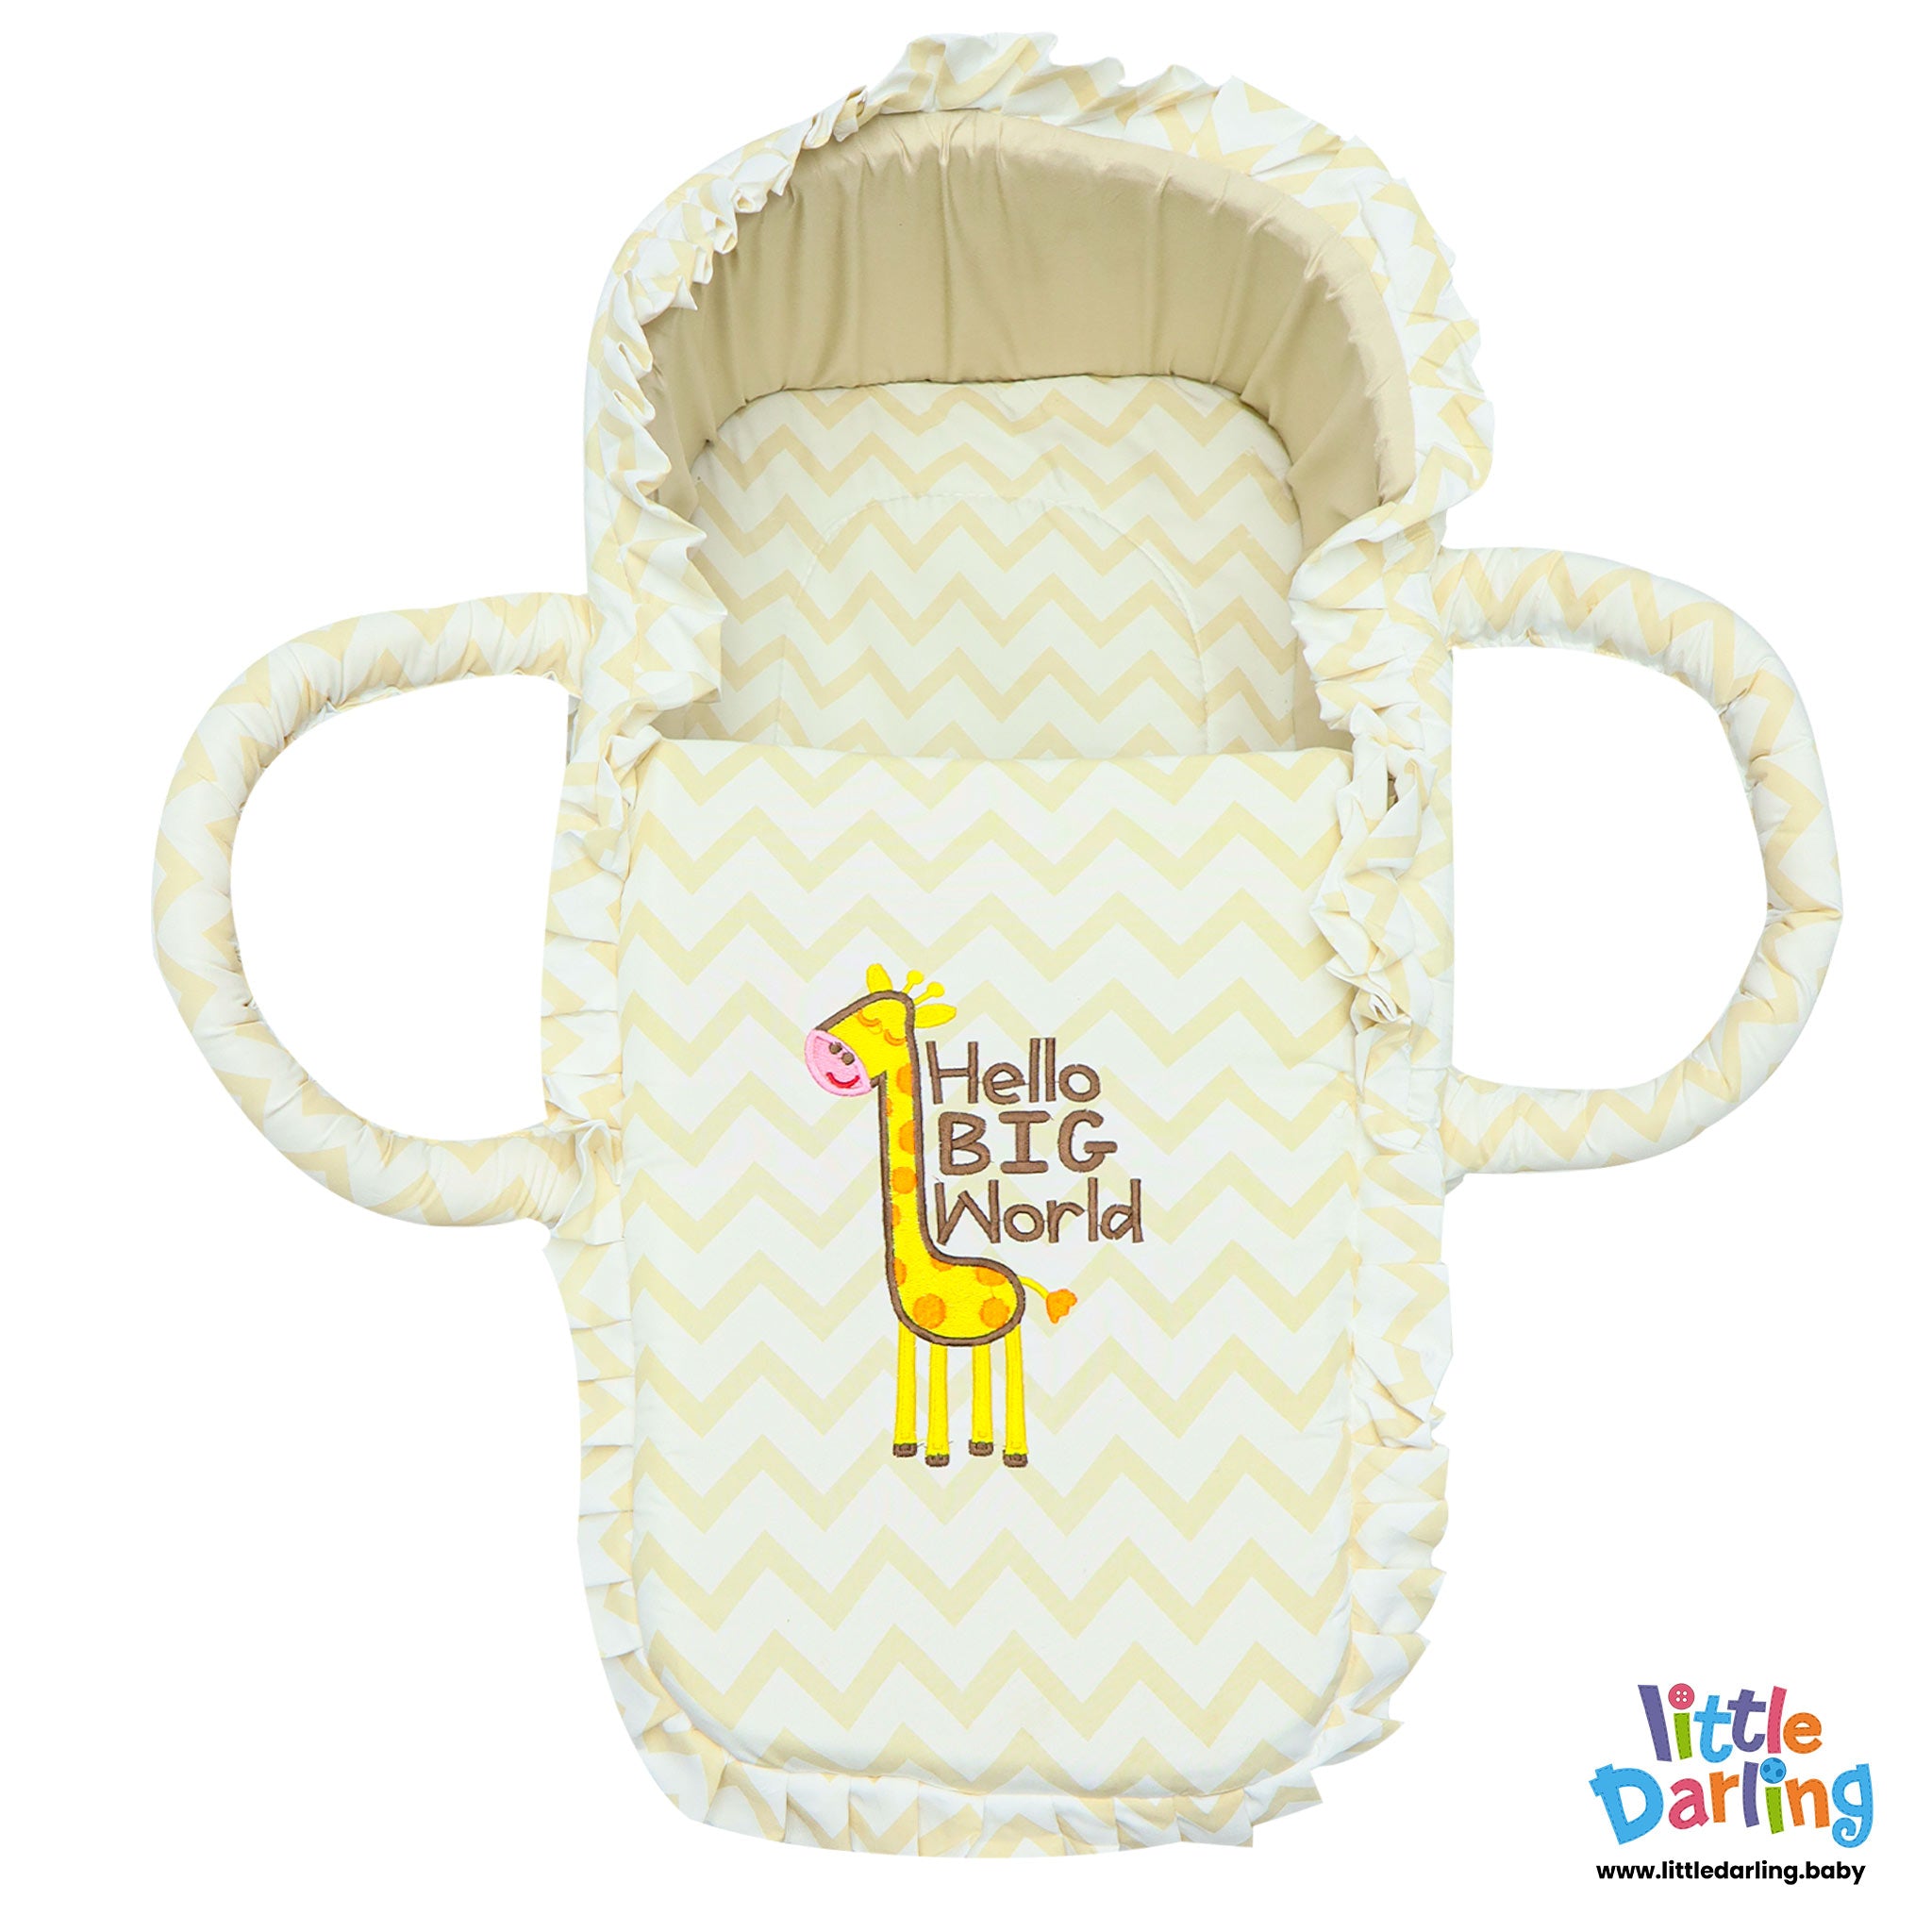 Infant Moses Basket Hello Big World by Little Darling